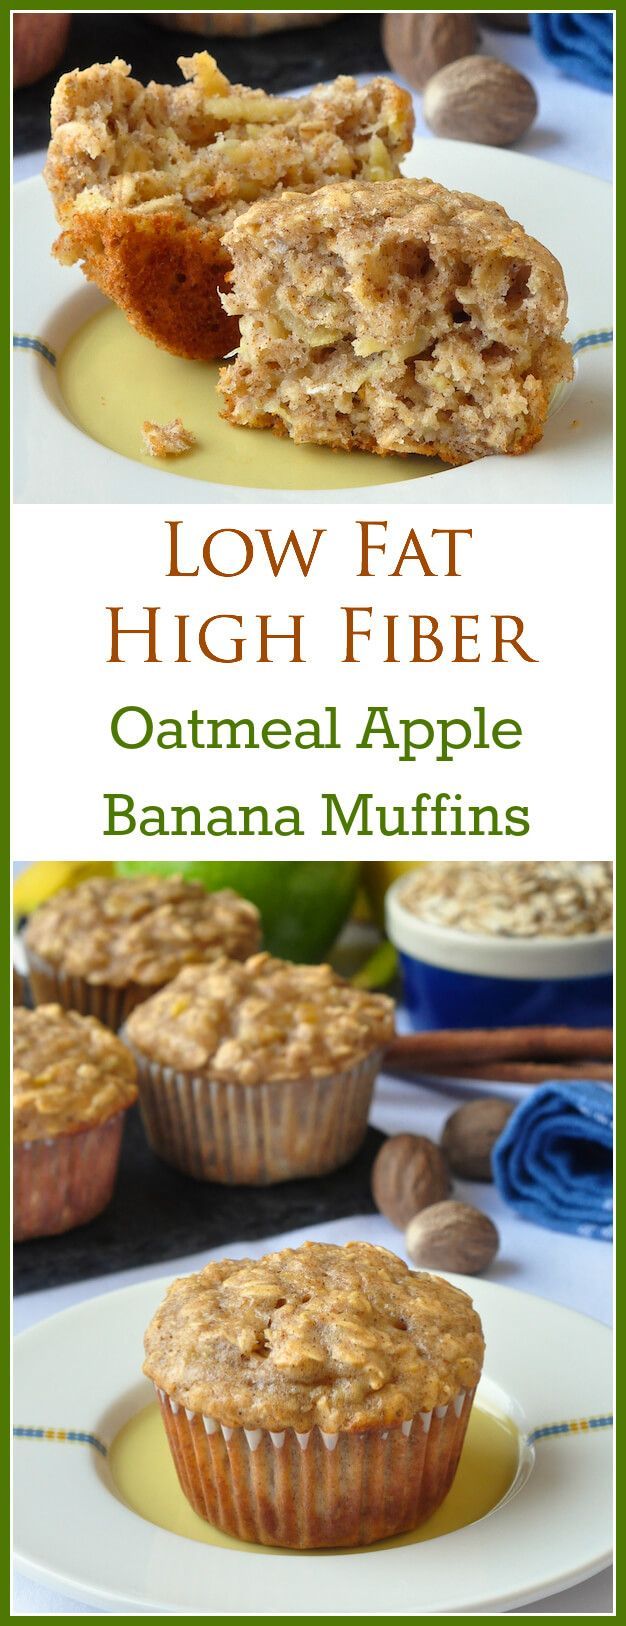 Oatmeal Apple Banana Low fat Muffins – A very easy to make recipe for moist, delicious, wholesome breakfast muffins that use a